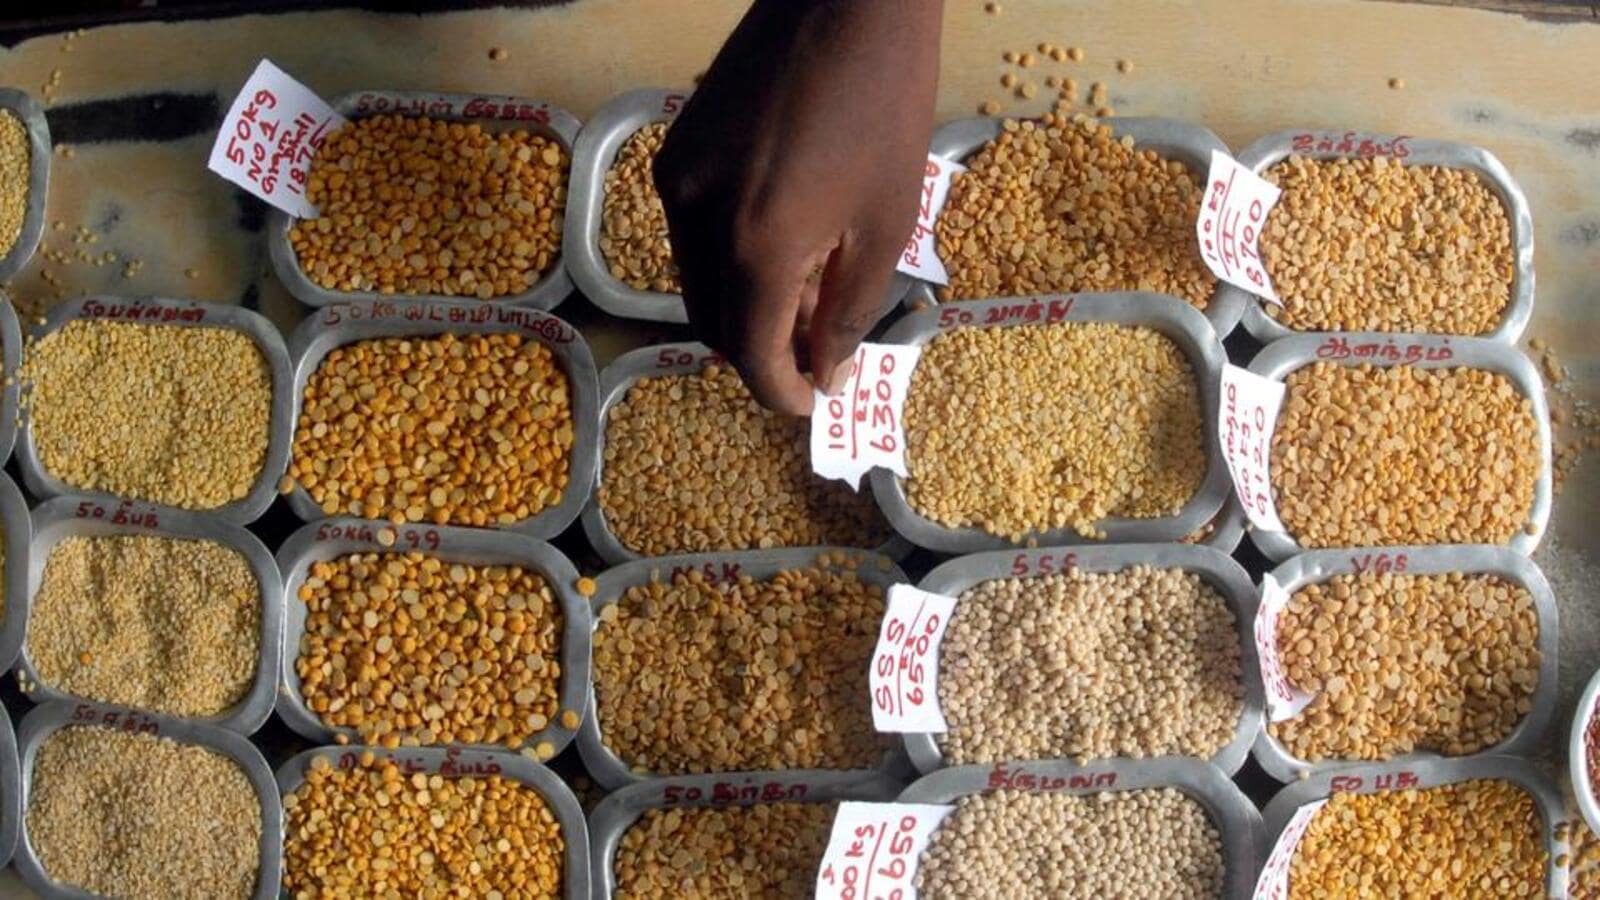 Govt asks traders to speed up pulses import from Myanmar using forex | Latest News India